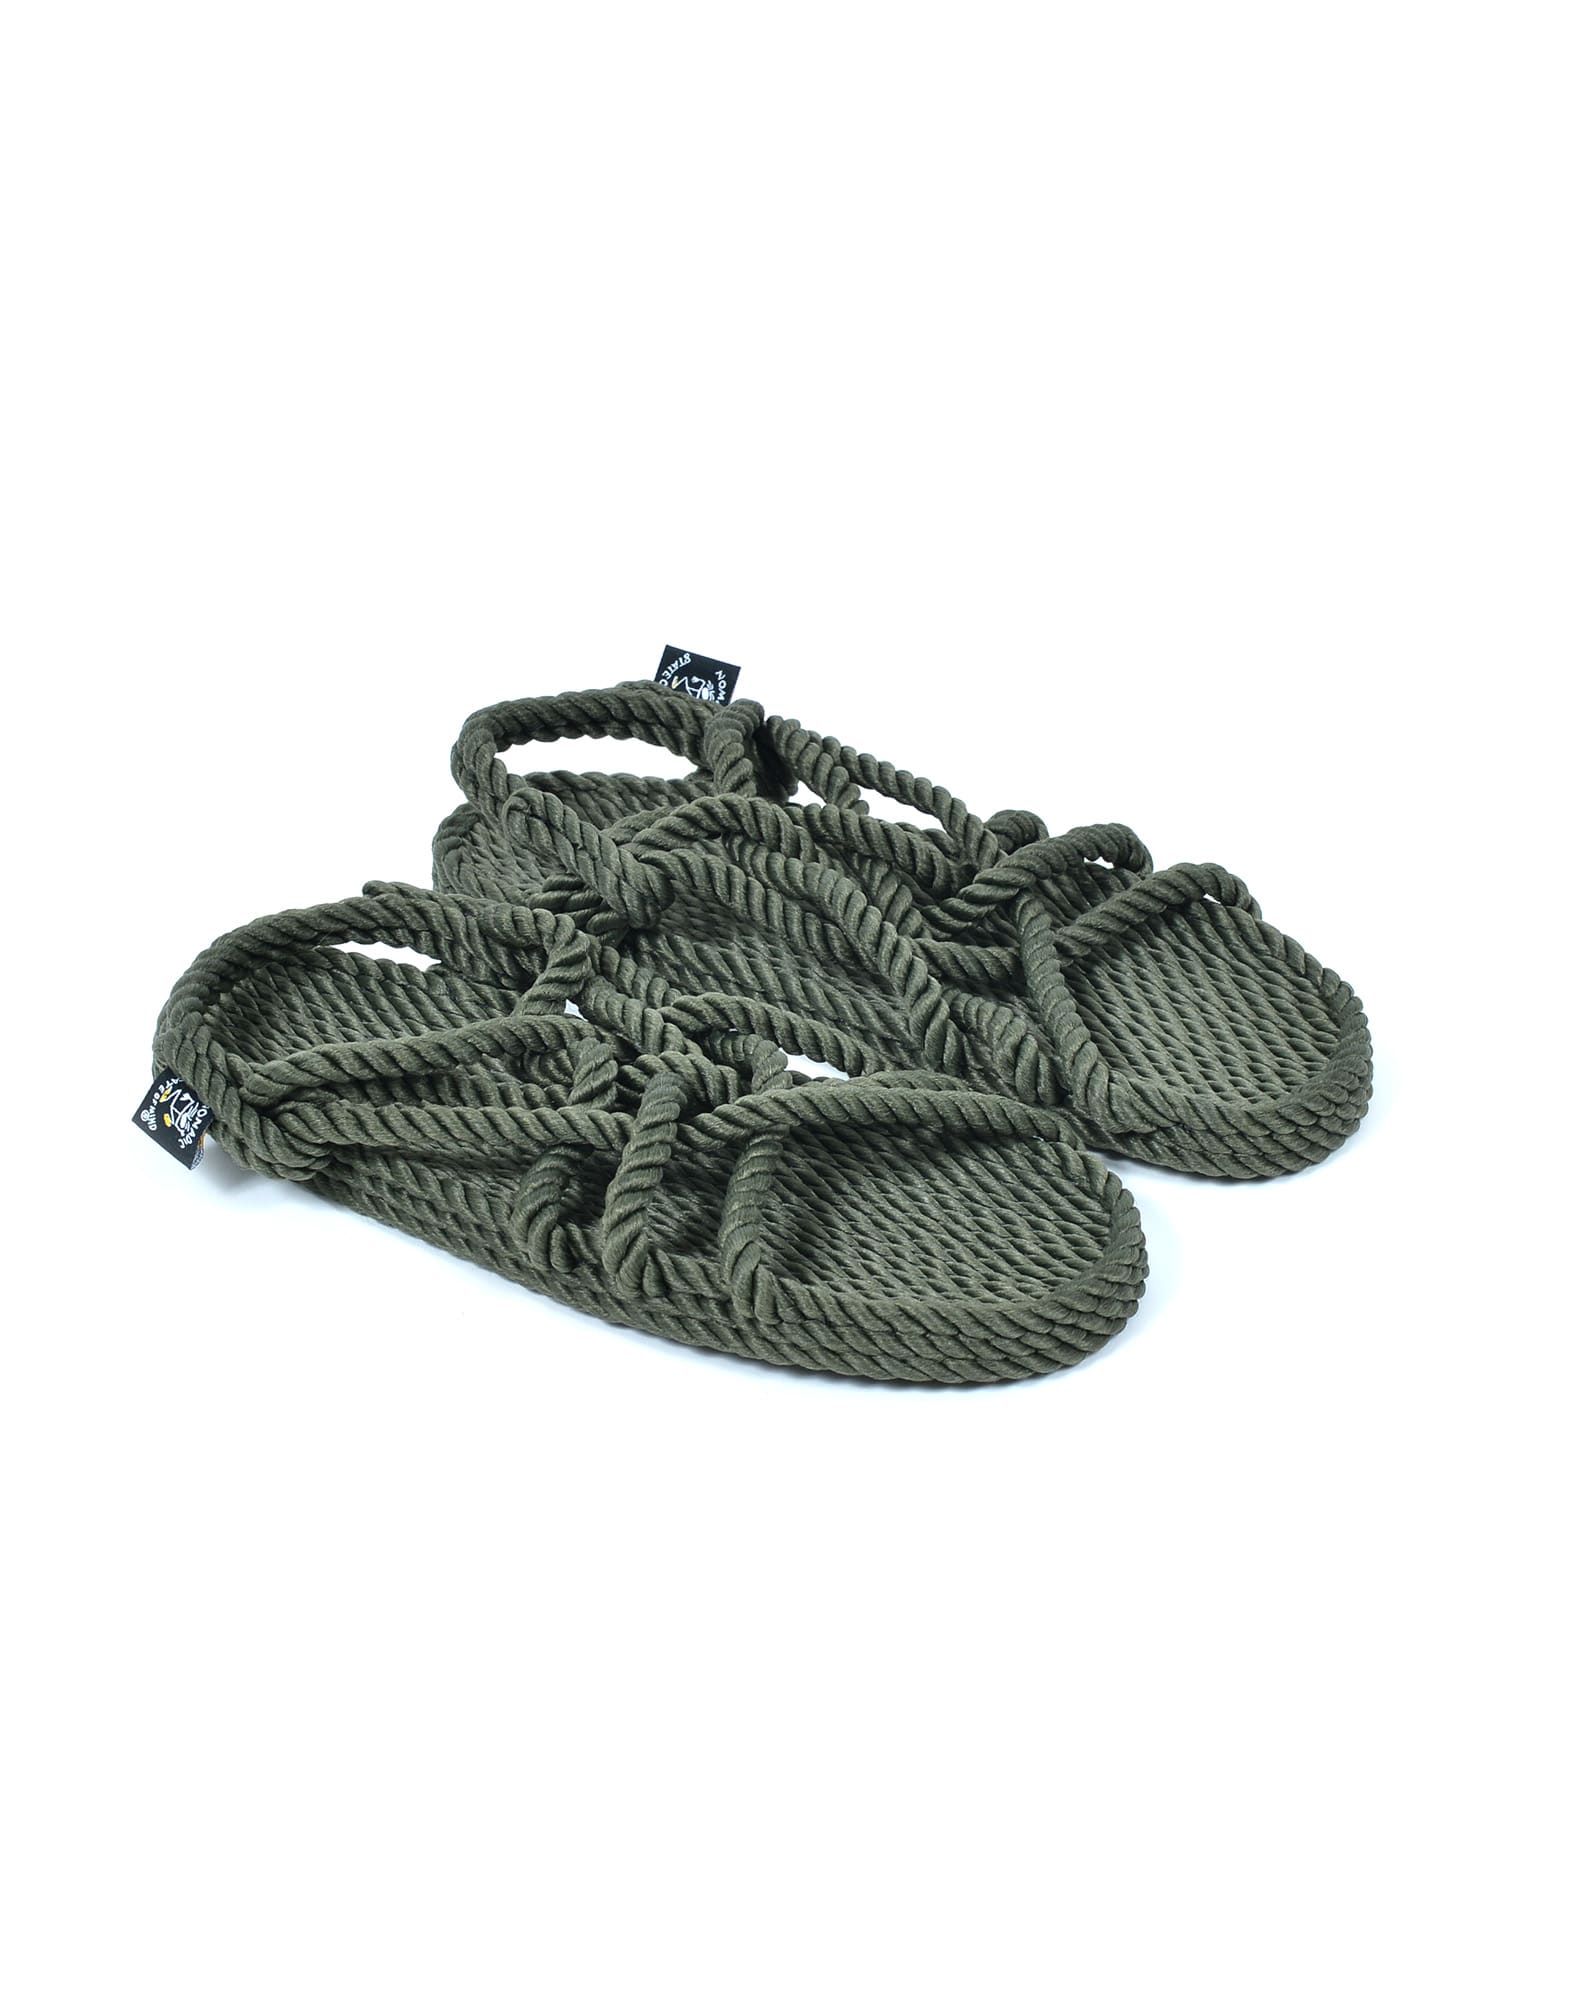 Sandals Military